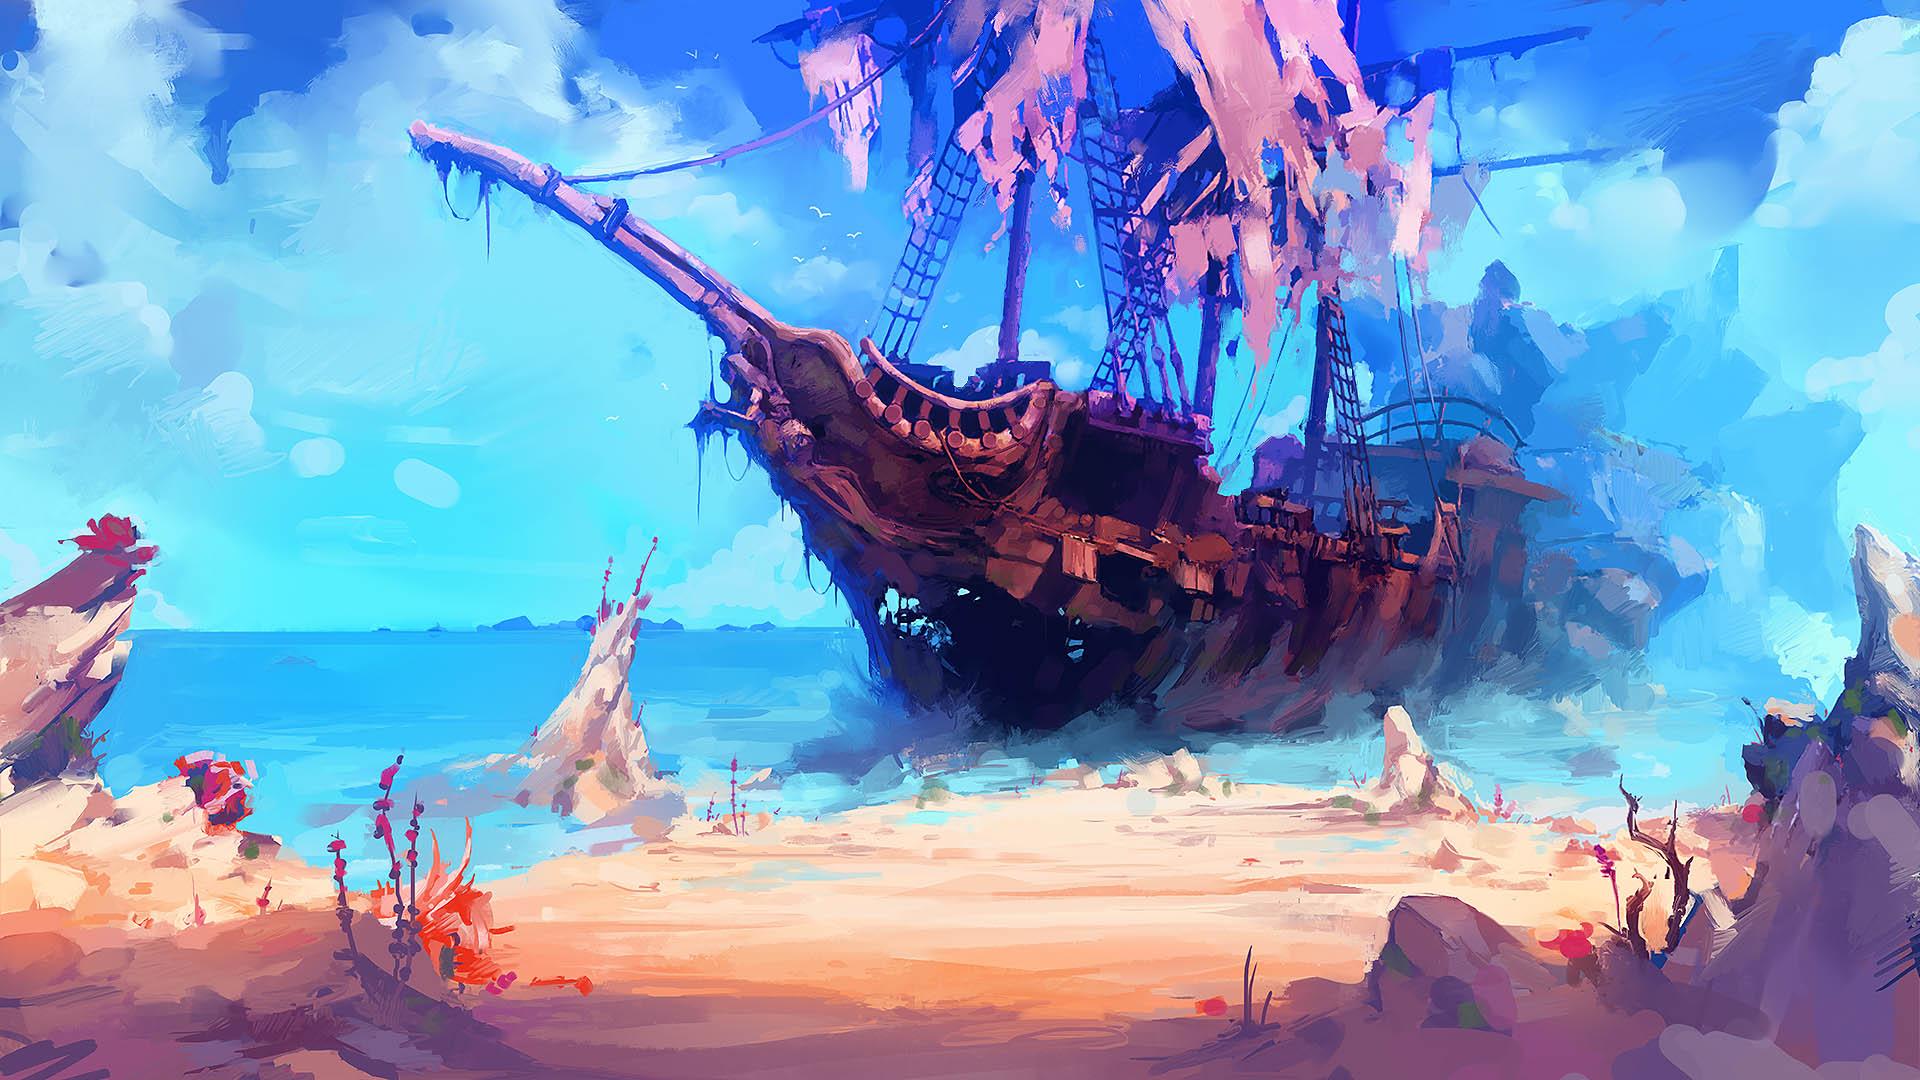 Shipwreck. Wallpaper from Trine 3: The Artifacts of Power